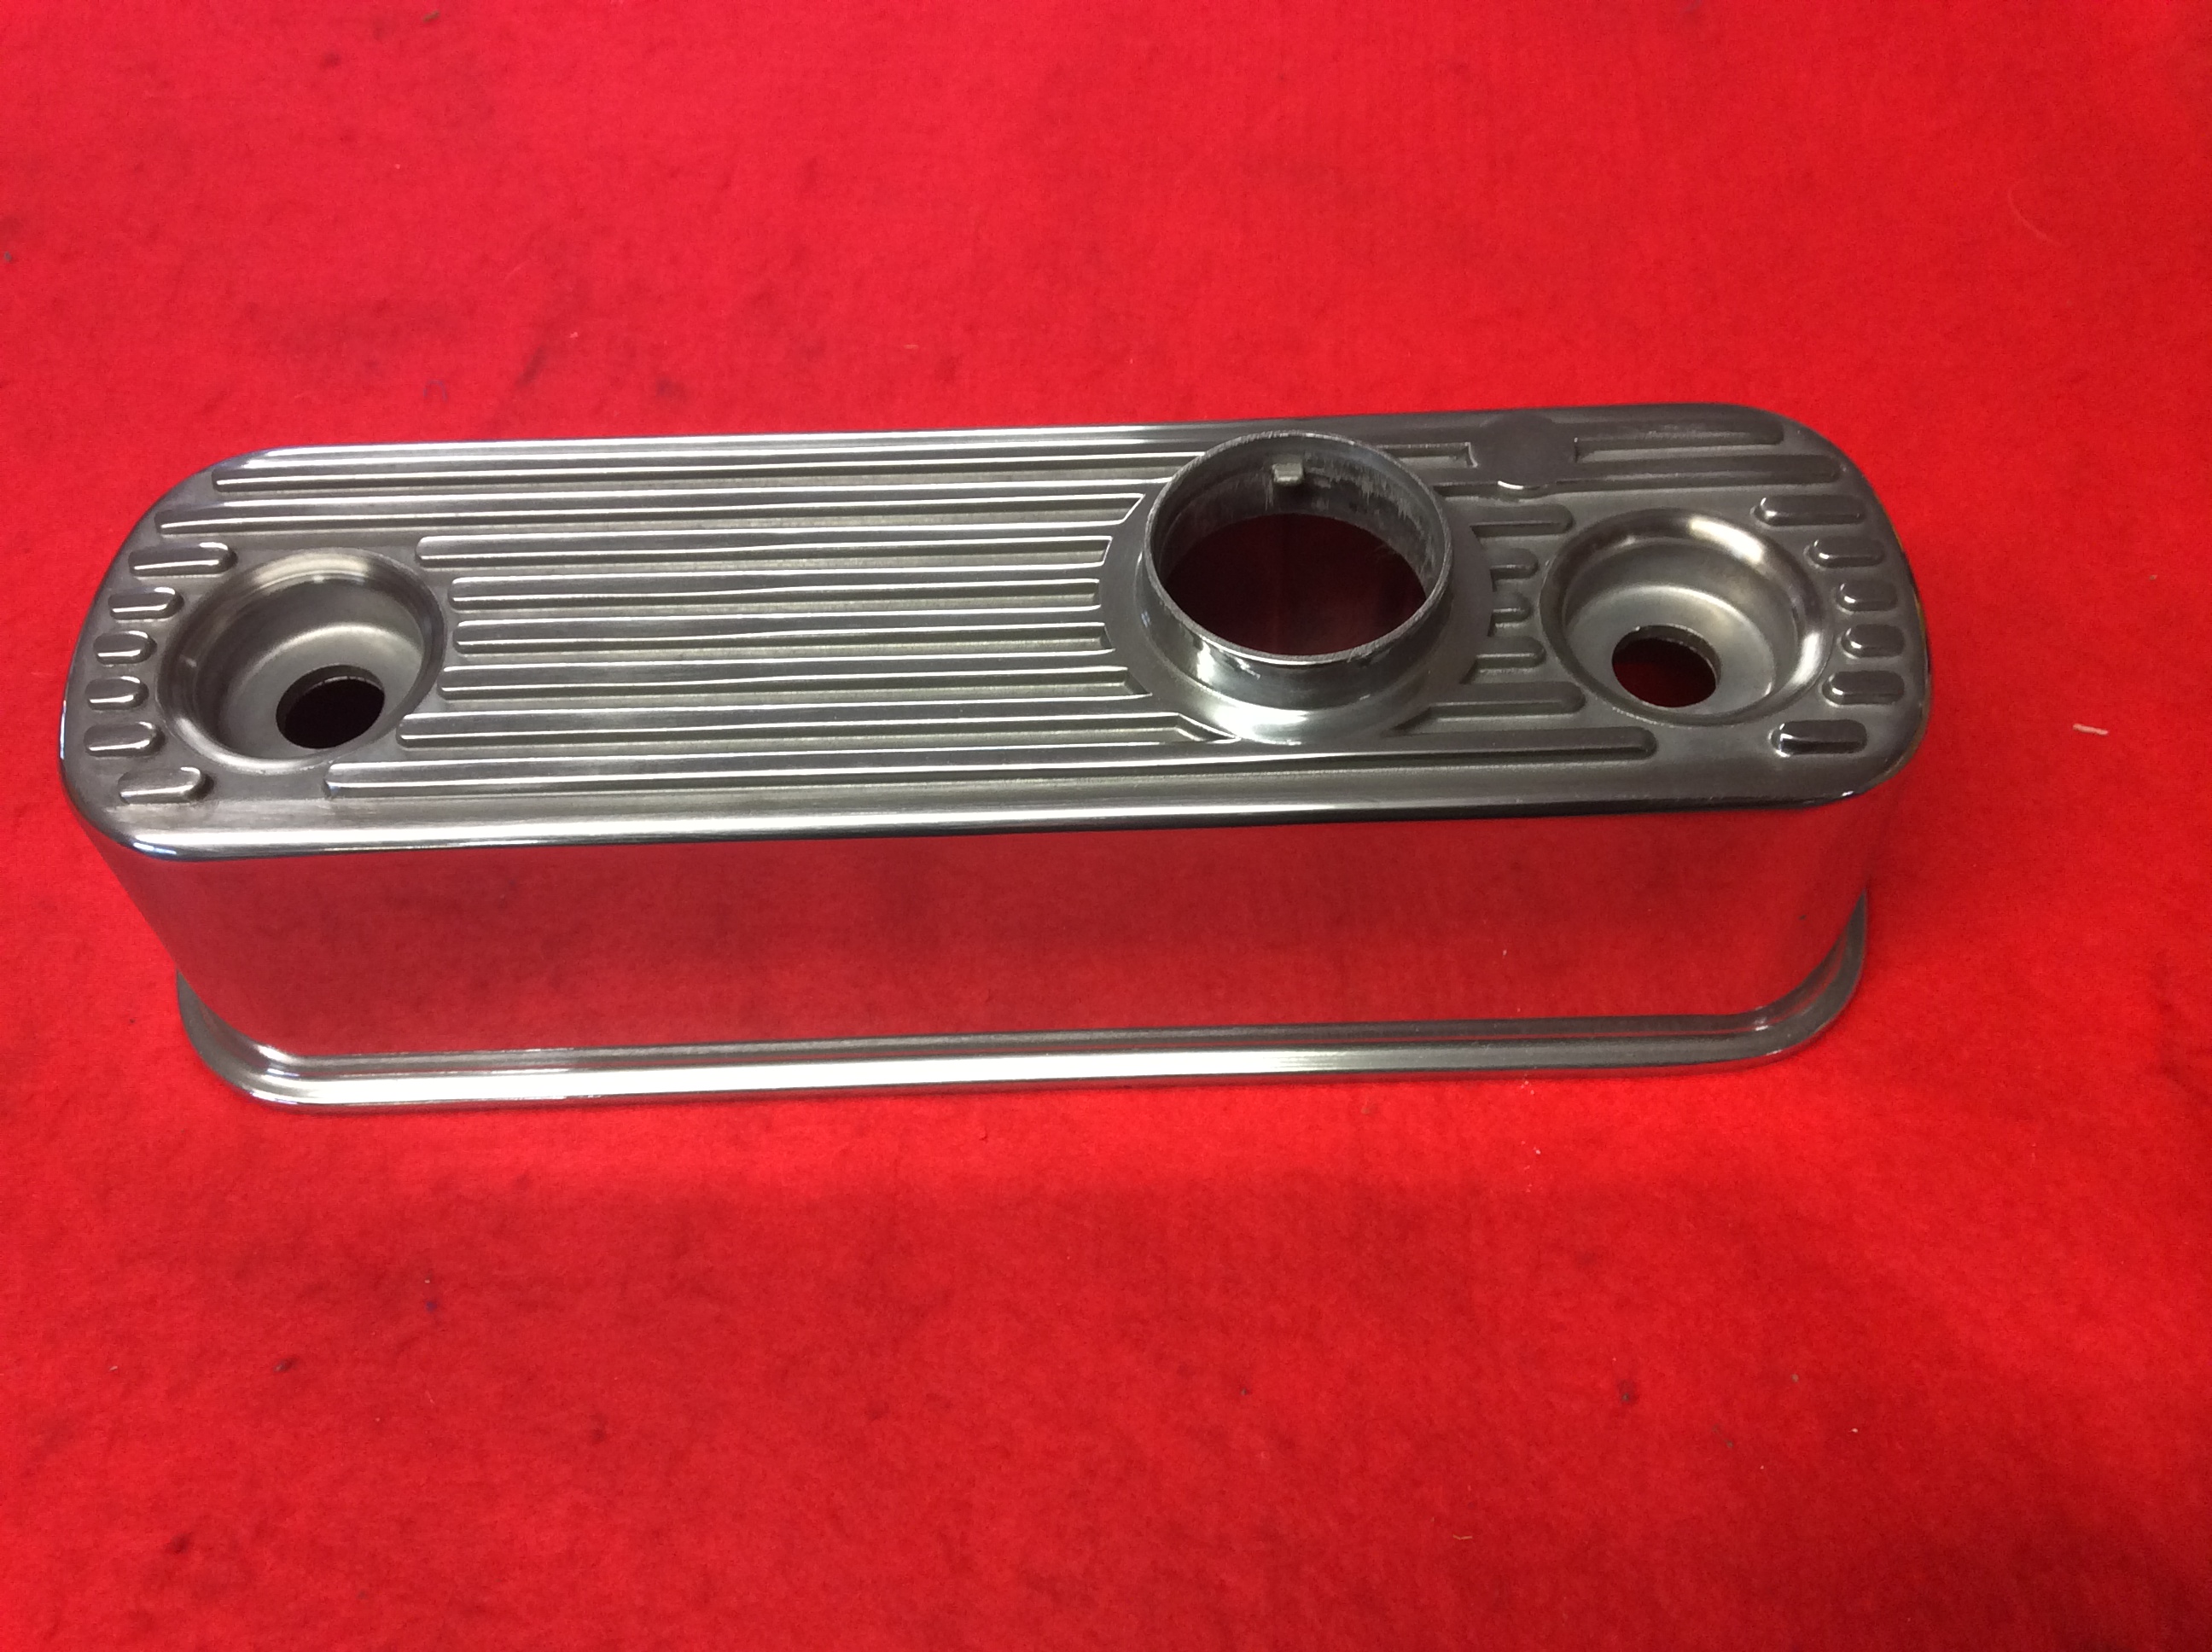 RC1K FITS ALL A SERIES ENGINES CLASSIC MINI ALLOY ROCKER COVER KIT